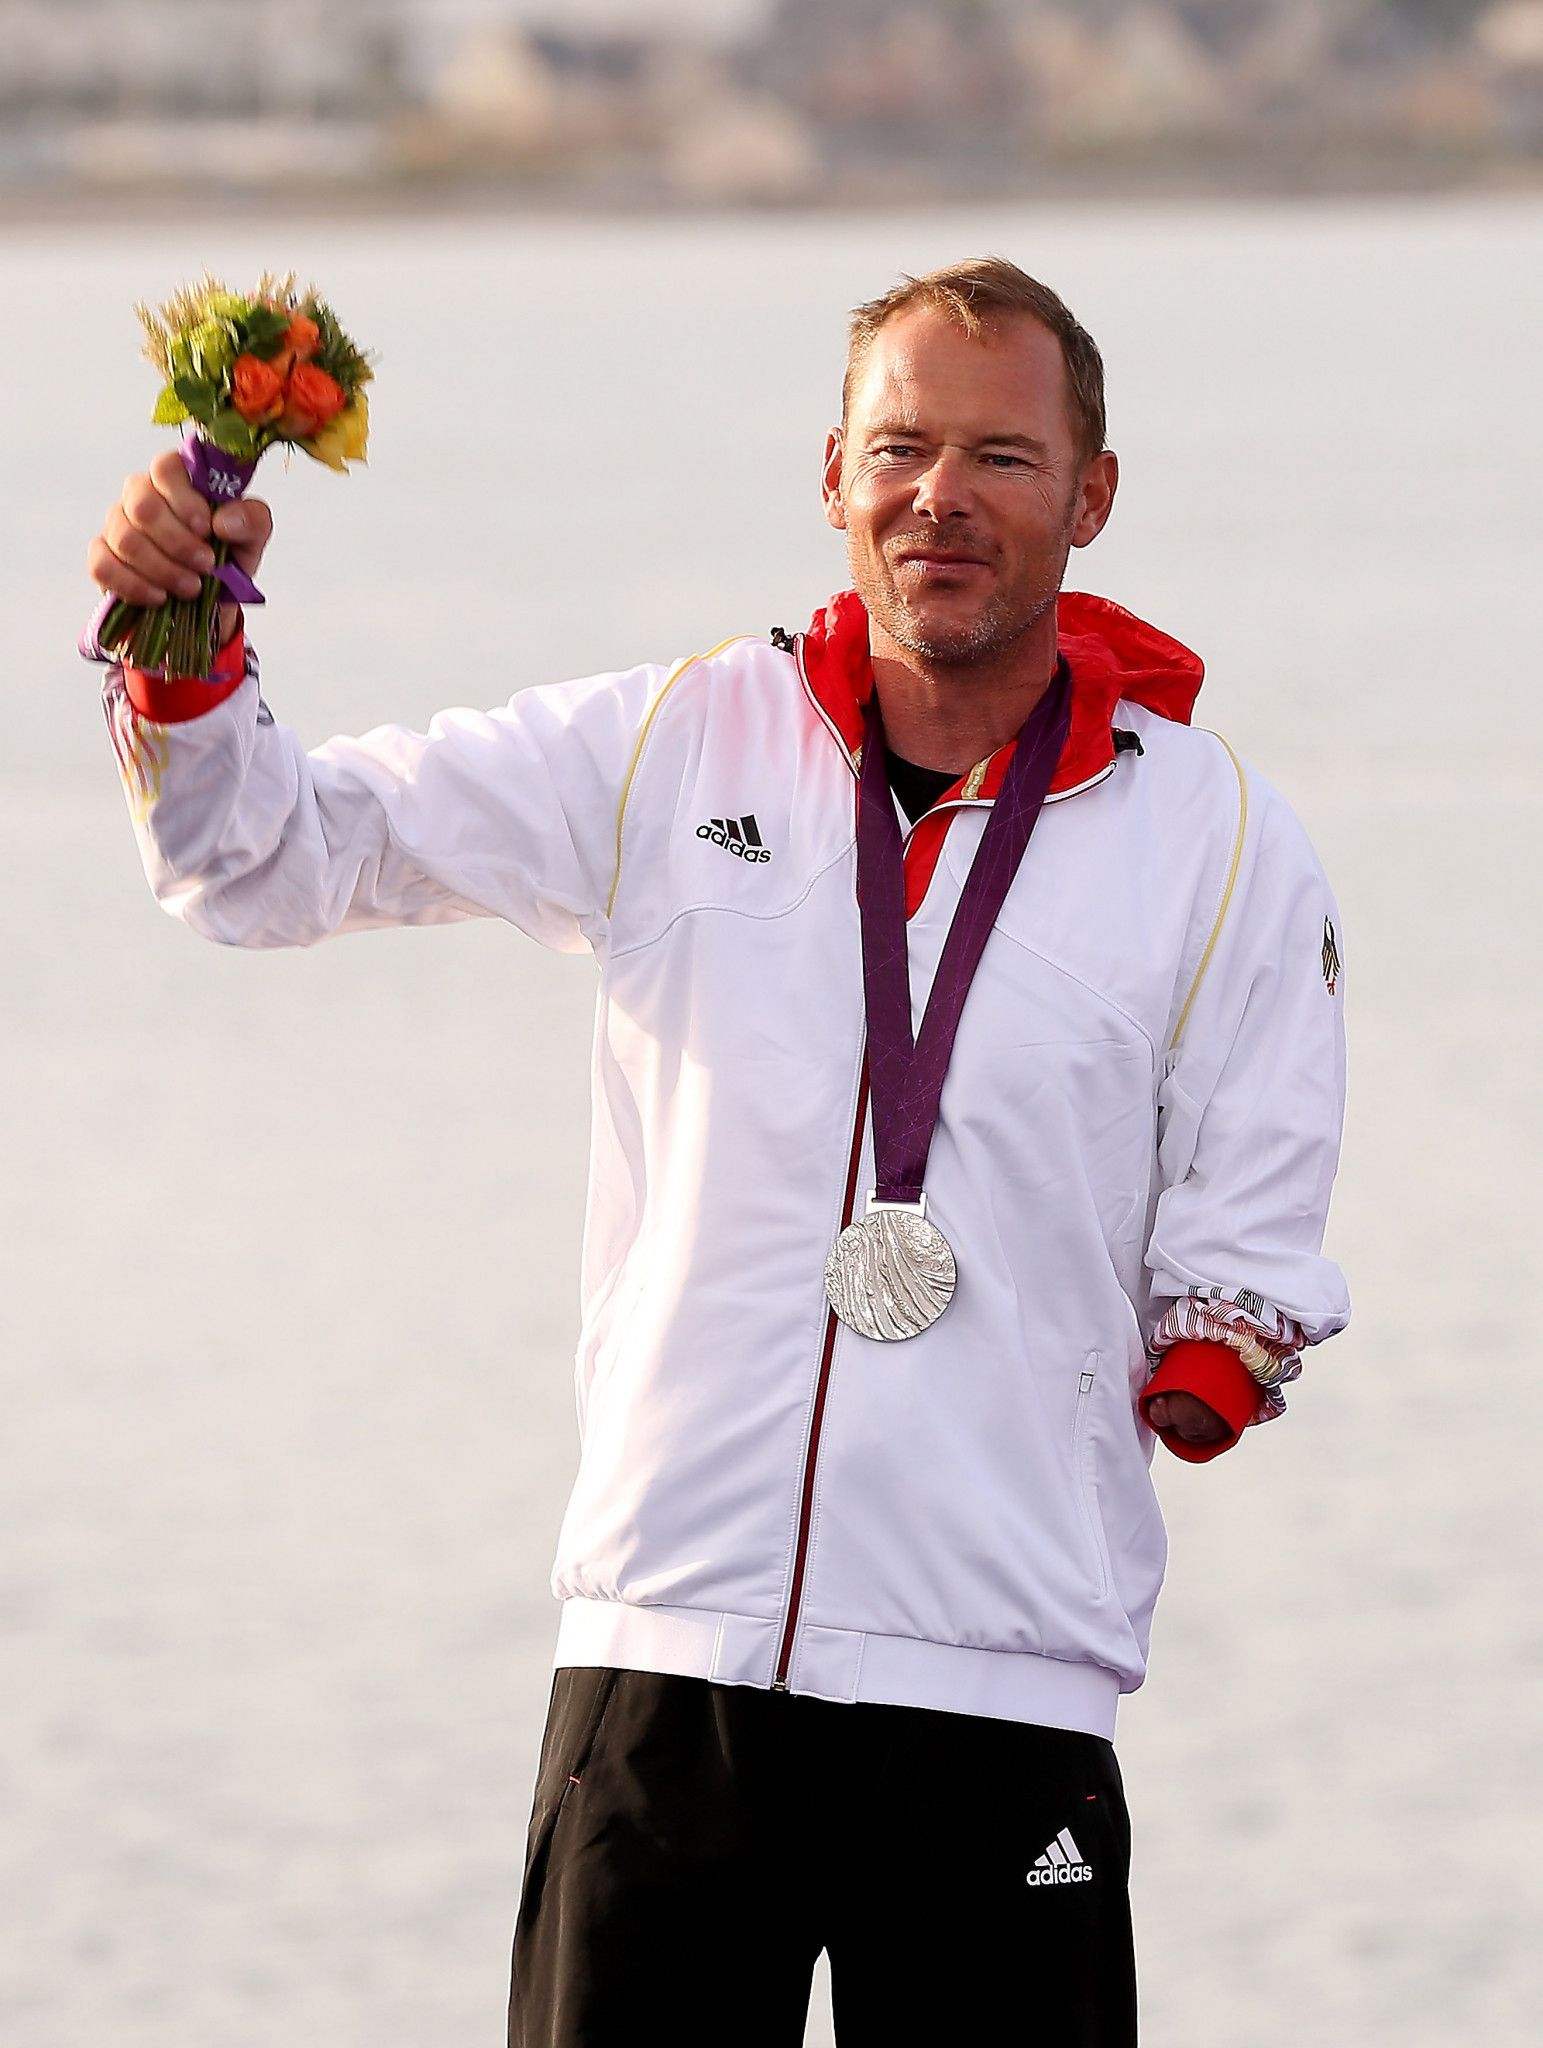 Germany's Heiko Kroger, who won Paralympic gold in 2000, picked up silver at London 2012 ©Getty Images